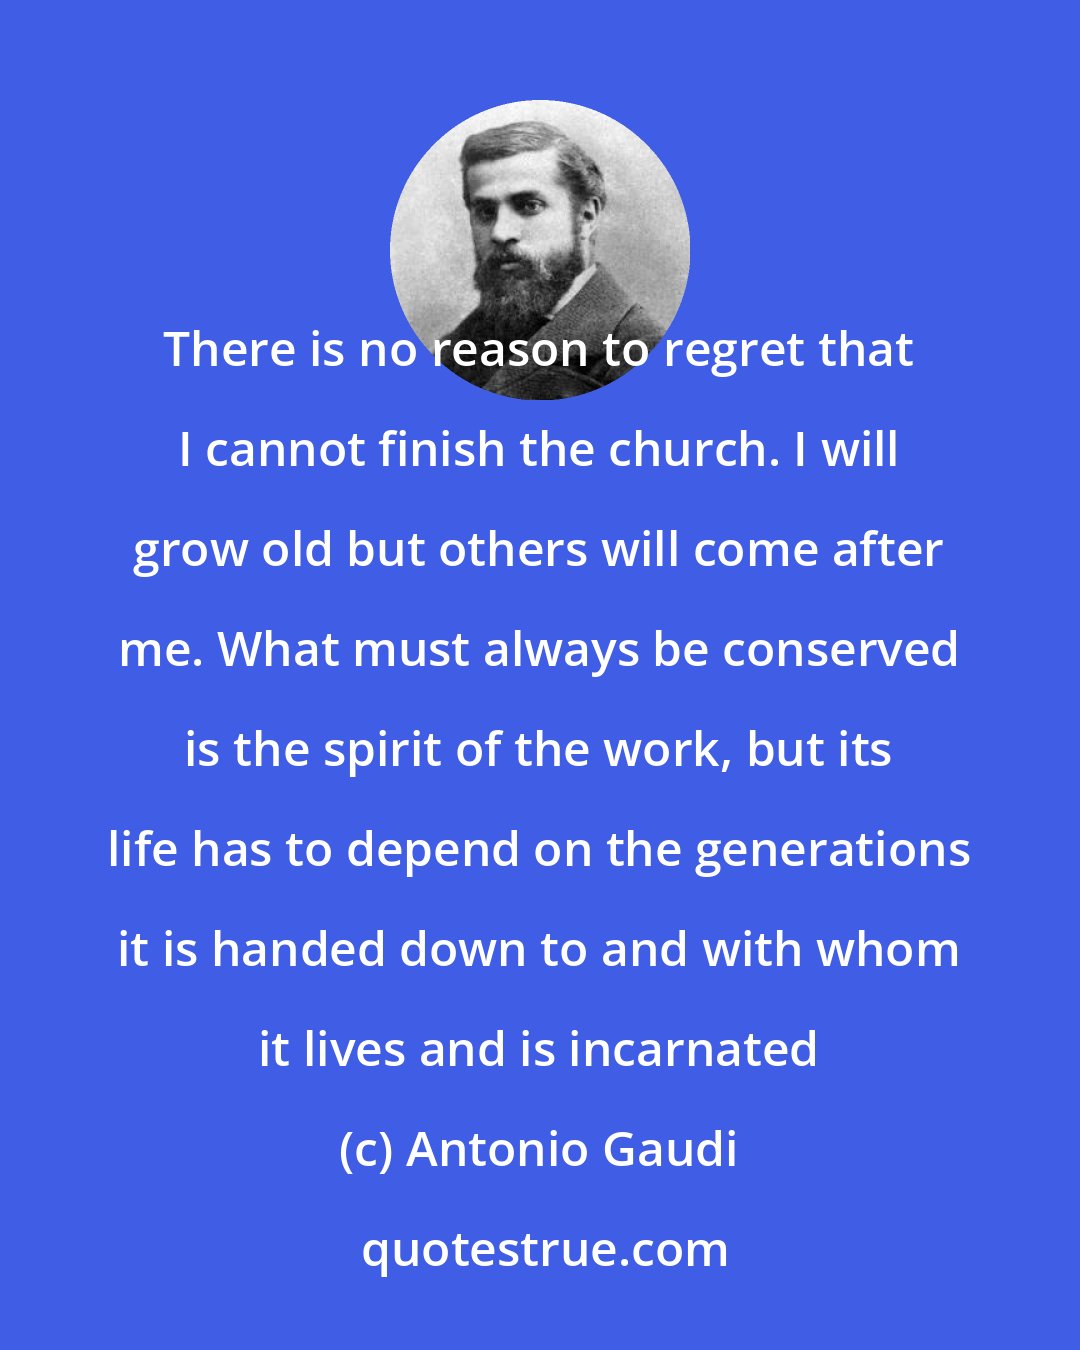 Antonio Gaudi: There is no reason to regret that I cannot finish the church. I will grow old but others will come after me. What must always be conserved is the spirit of the work, but its life has to depend on the generations it is handed down to and with whom it lives and is incarnated